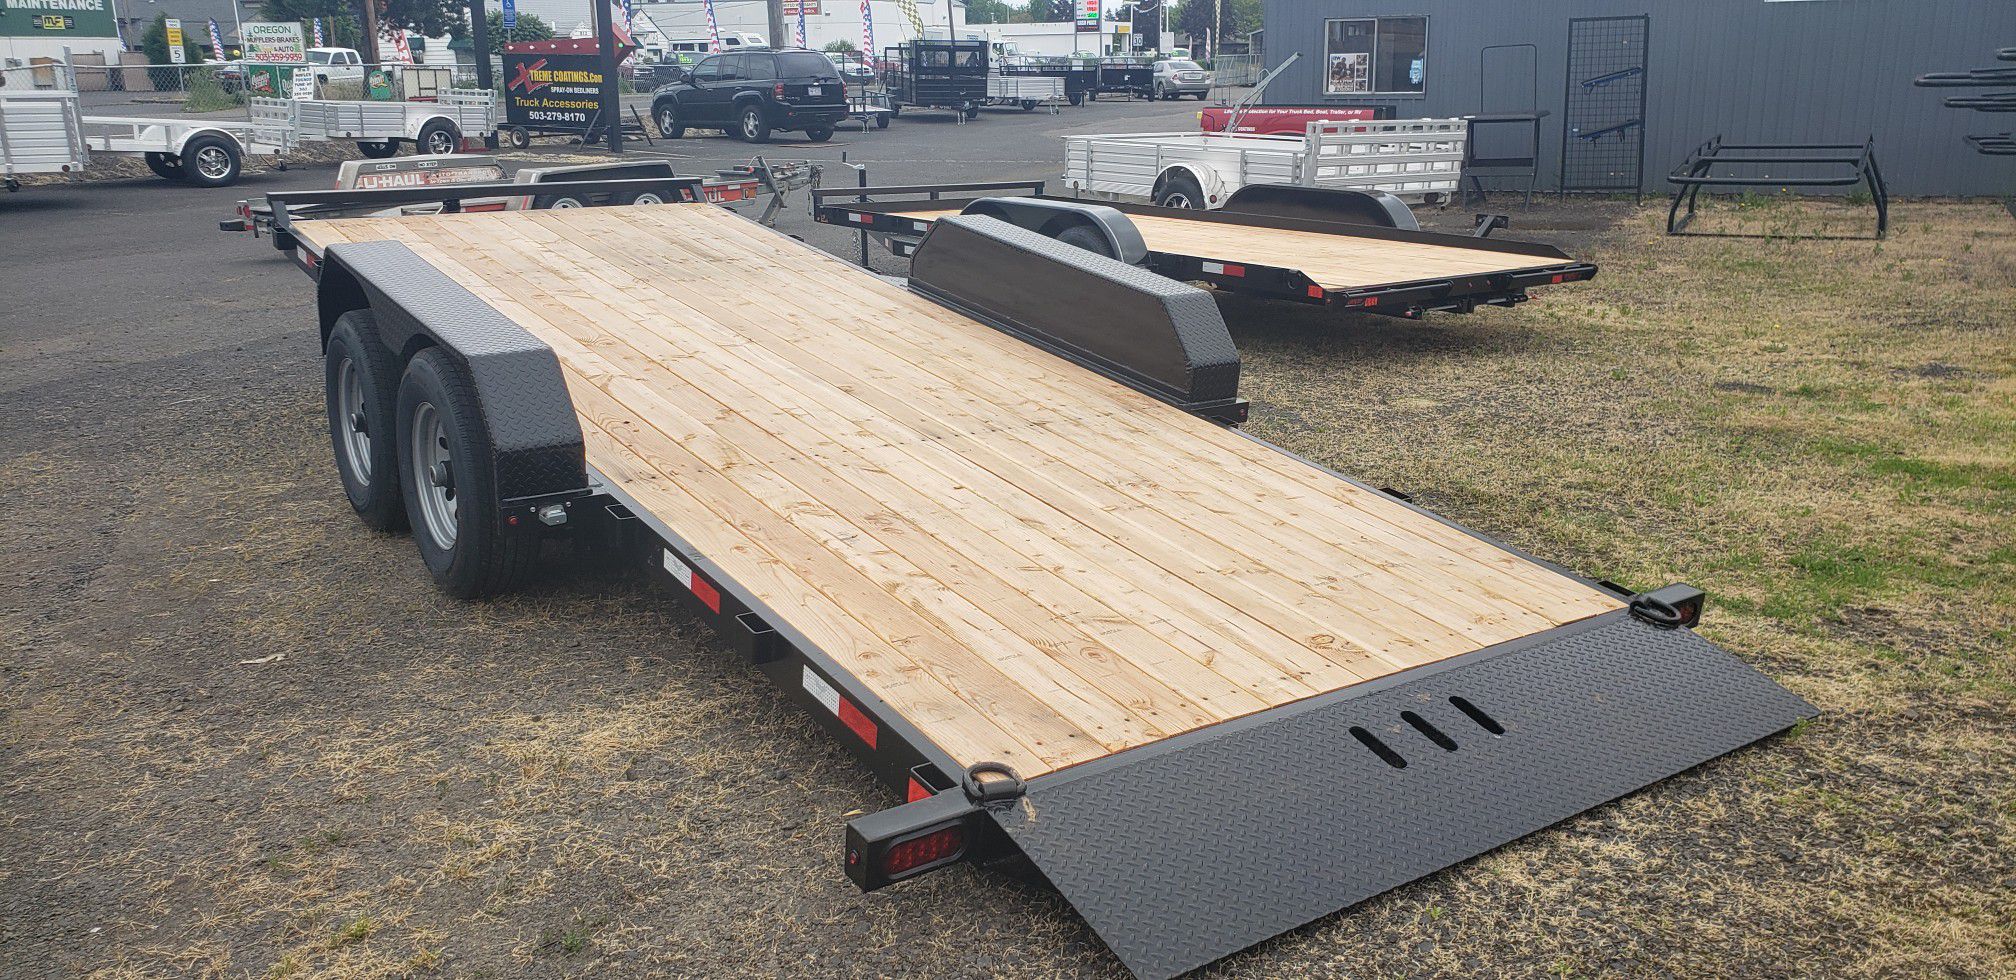 New Eagle Trailers 10k 7’x18’ Tandem Axle w/ Brakes on Both (financing available)